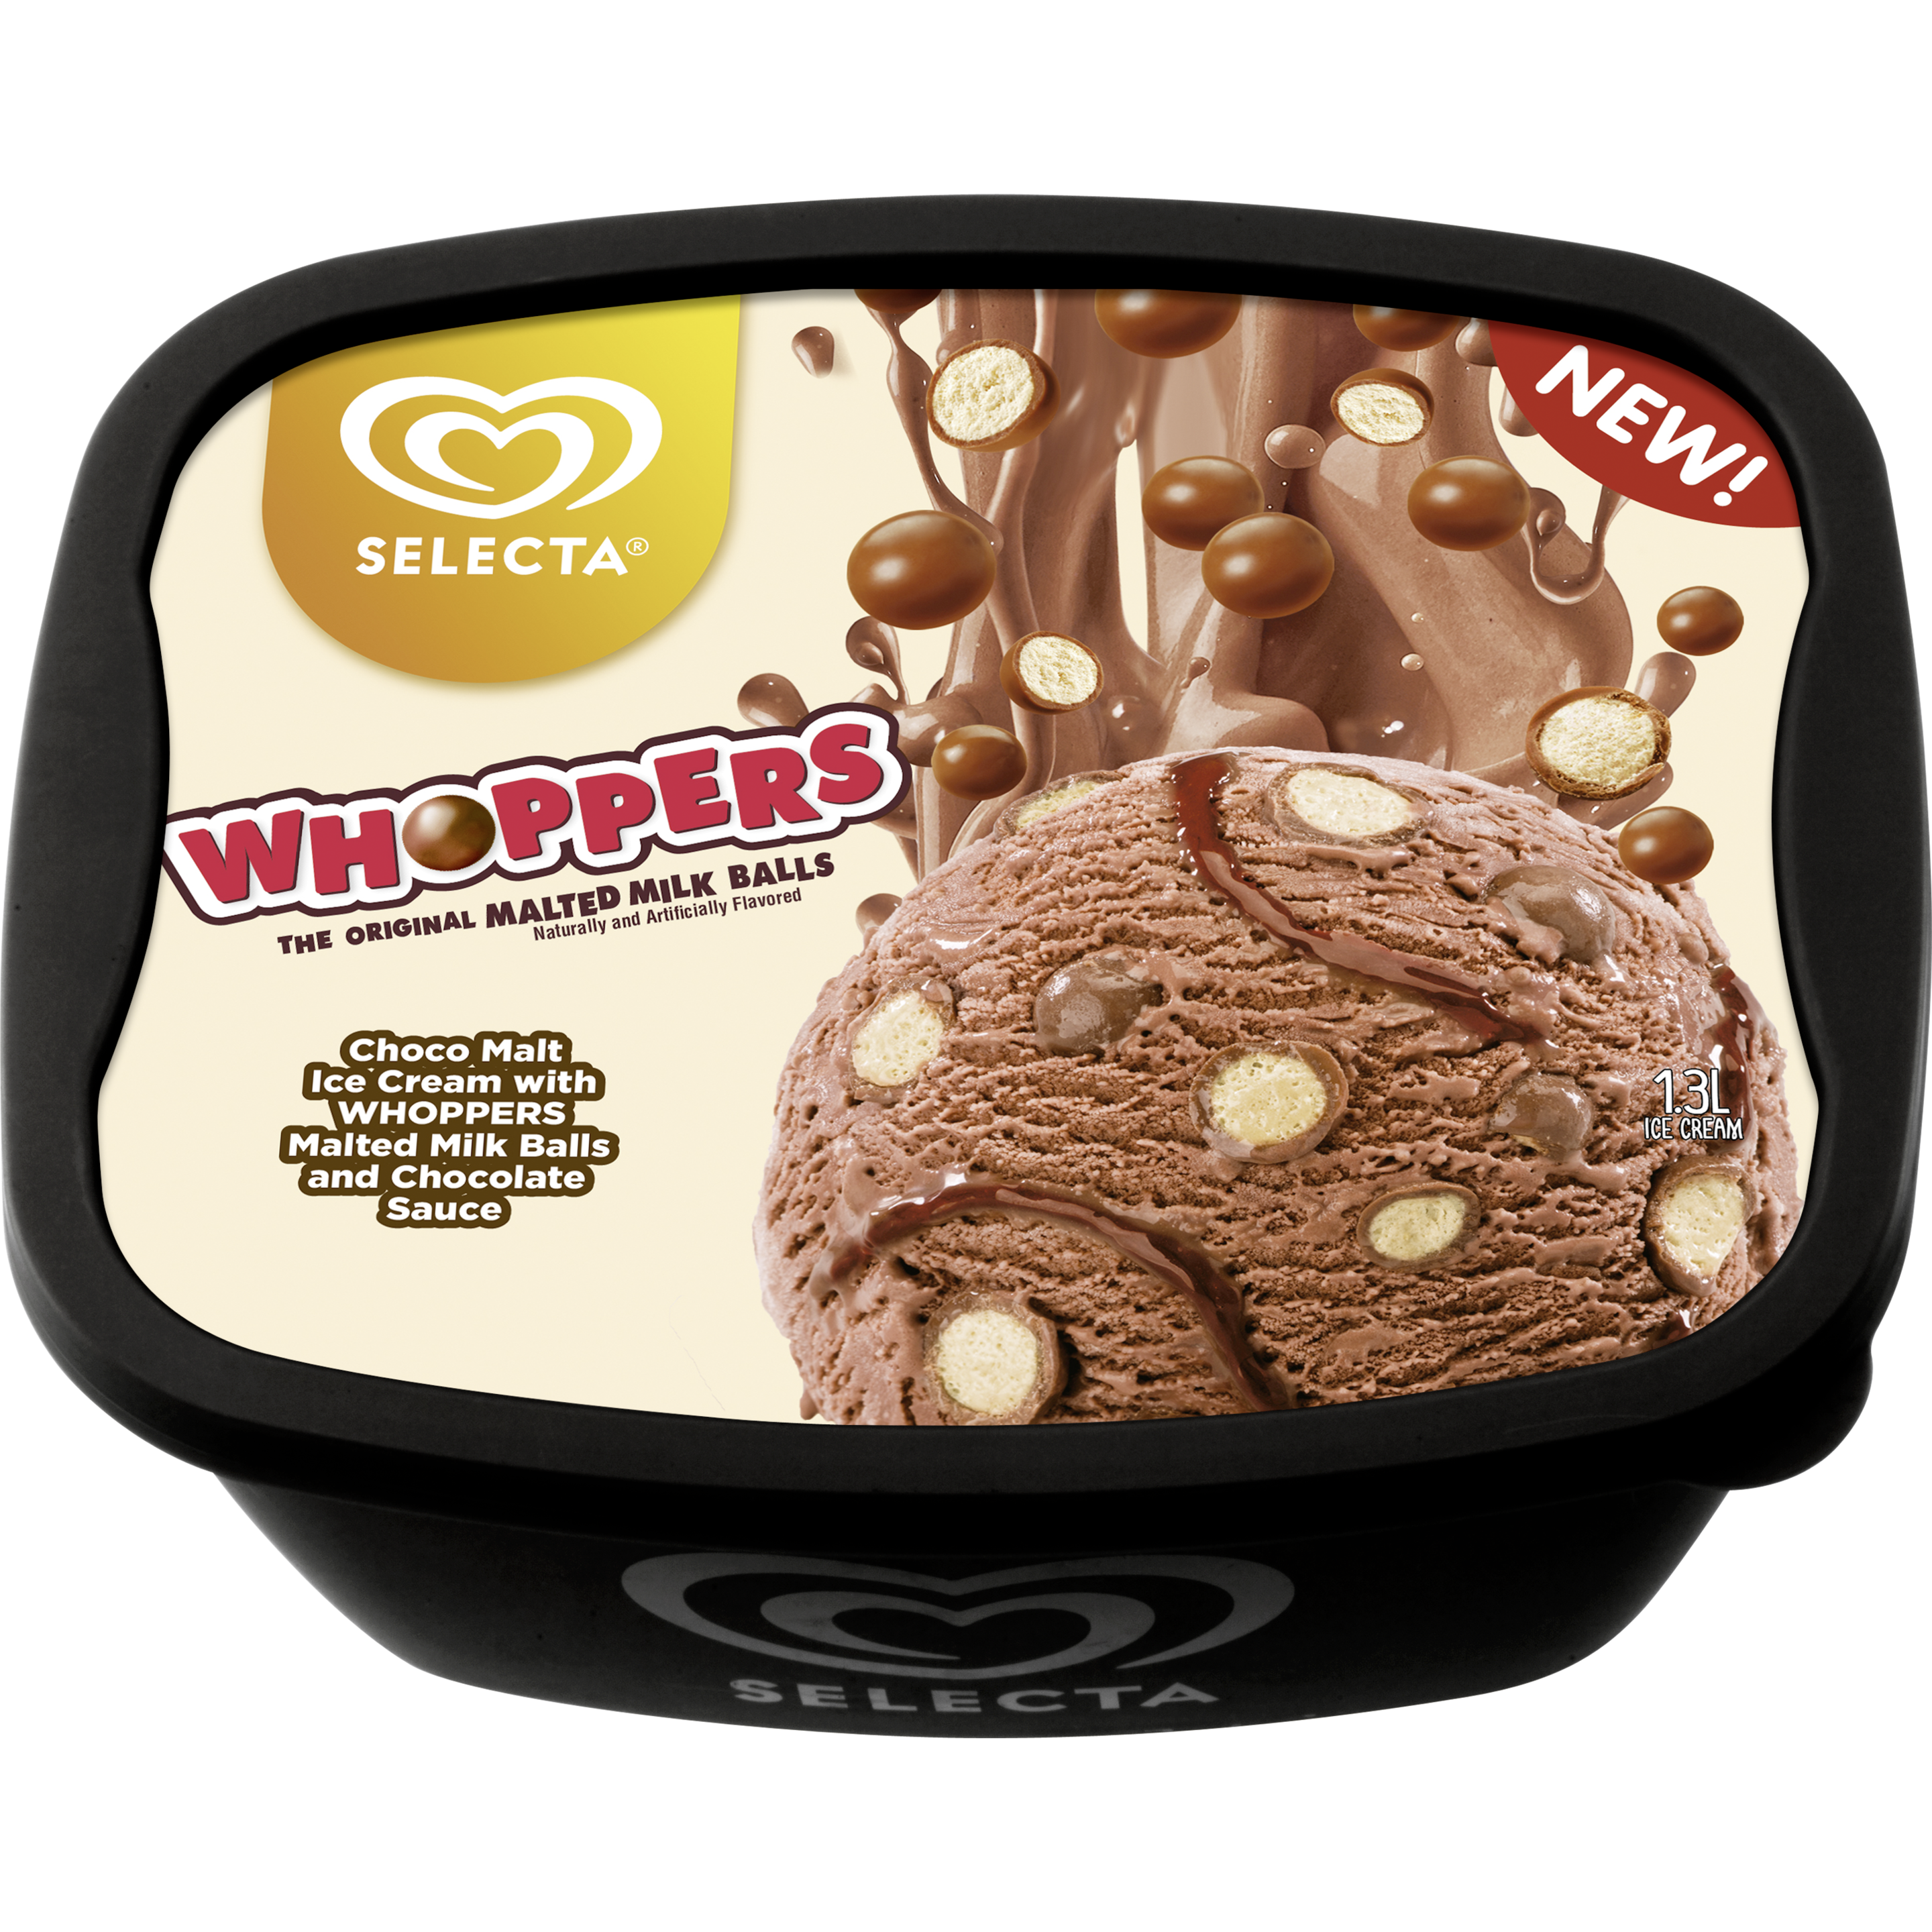 Selecta WHOPPERS Ice Cream Solo Pack